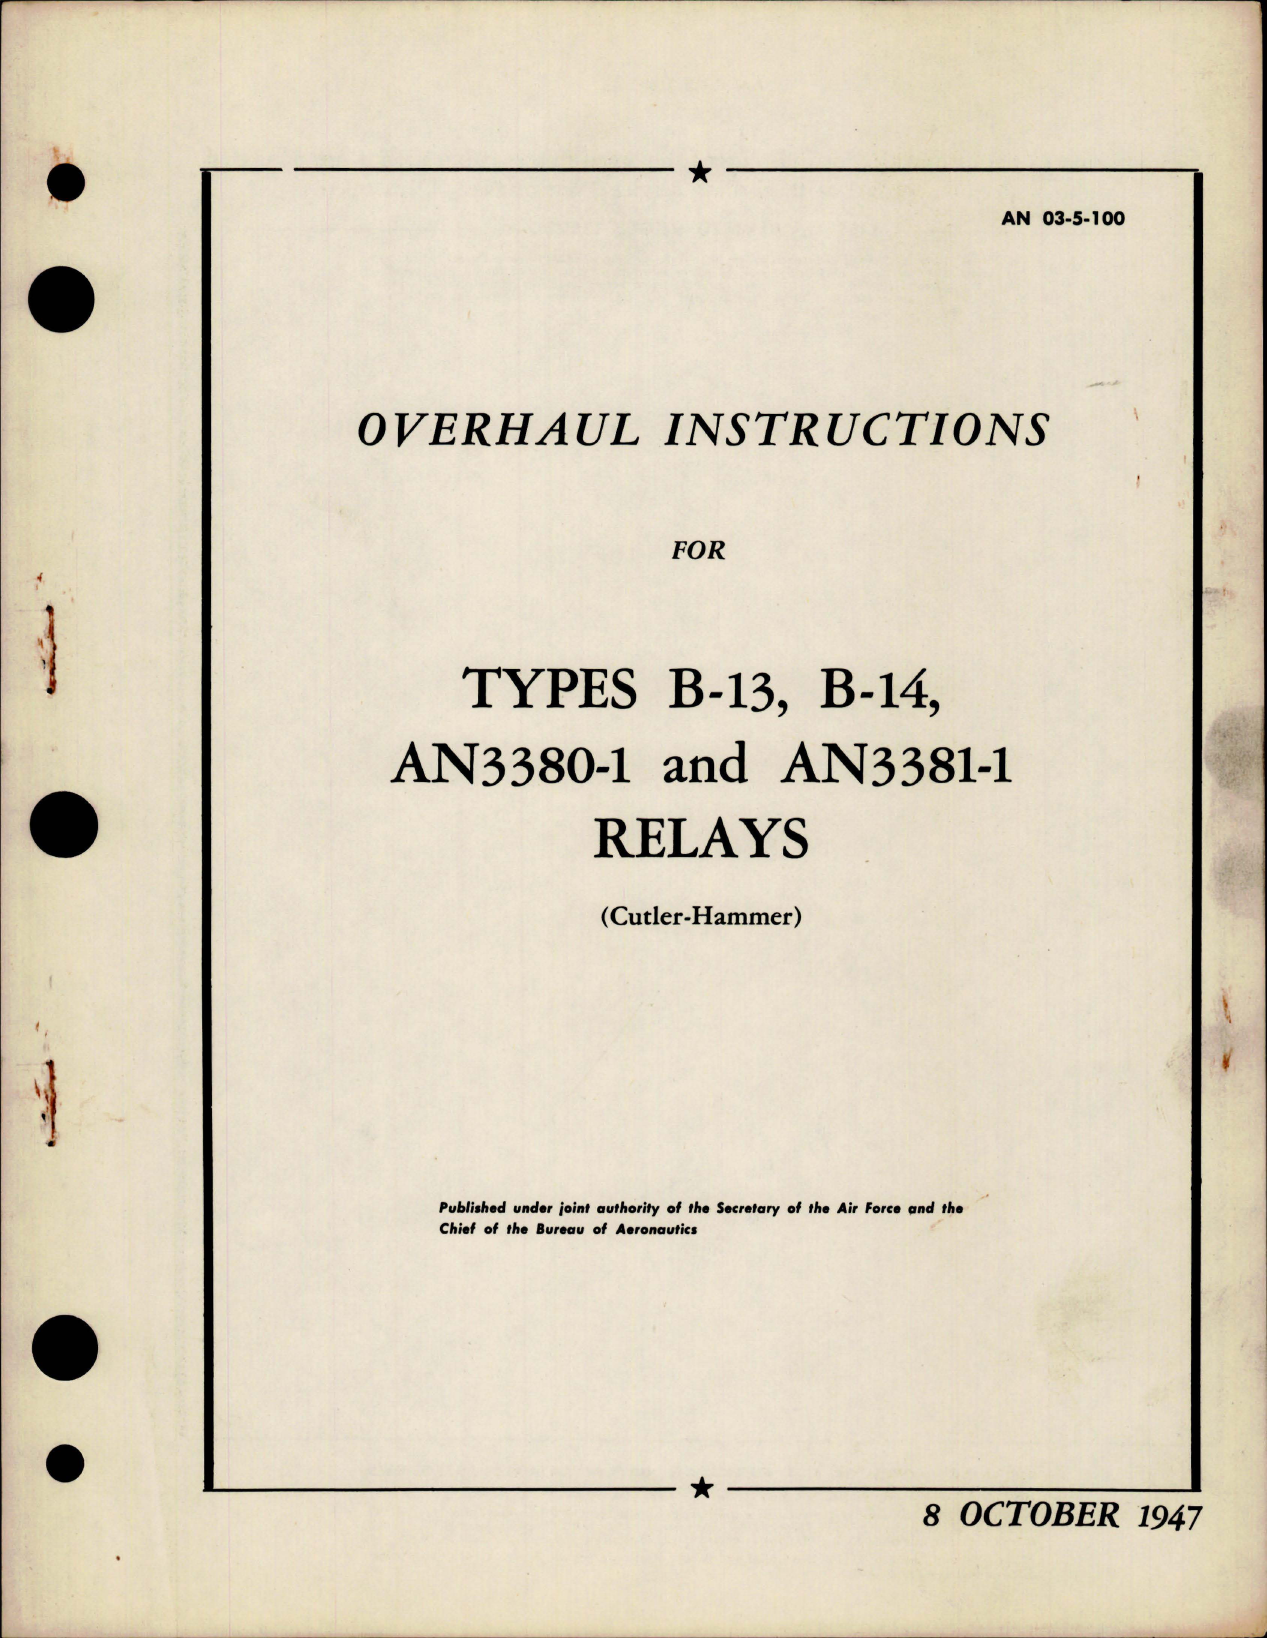 Sample page 1 from AirCorps Library document: Overhaul Instructions for Relays - Types B-13, B-14, AN3380-1 and AN3381-1